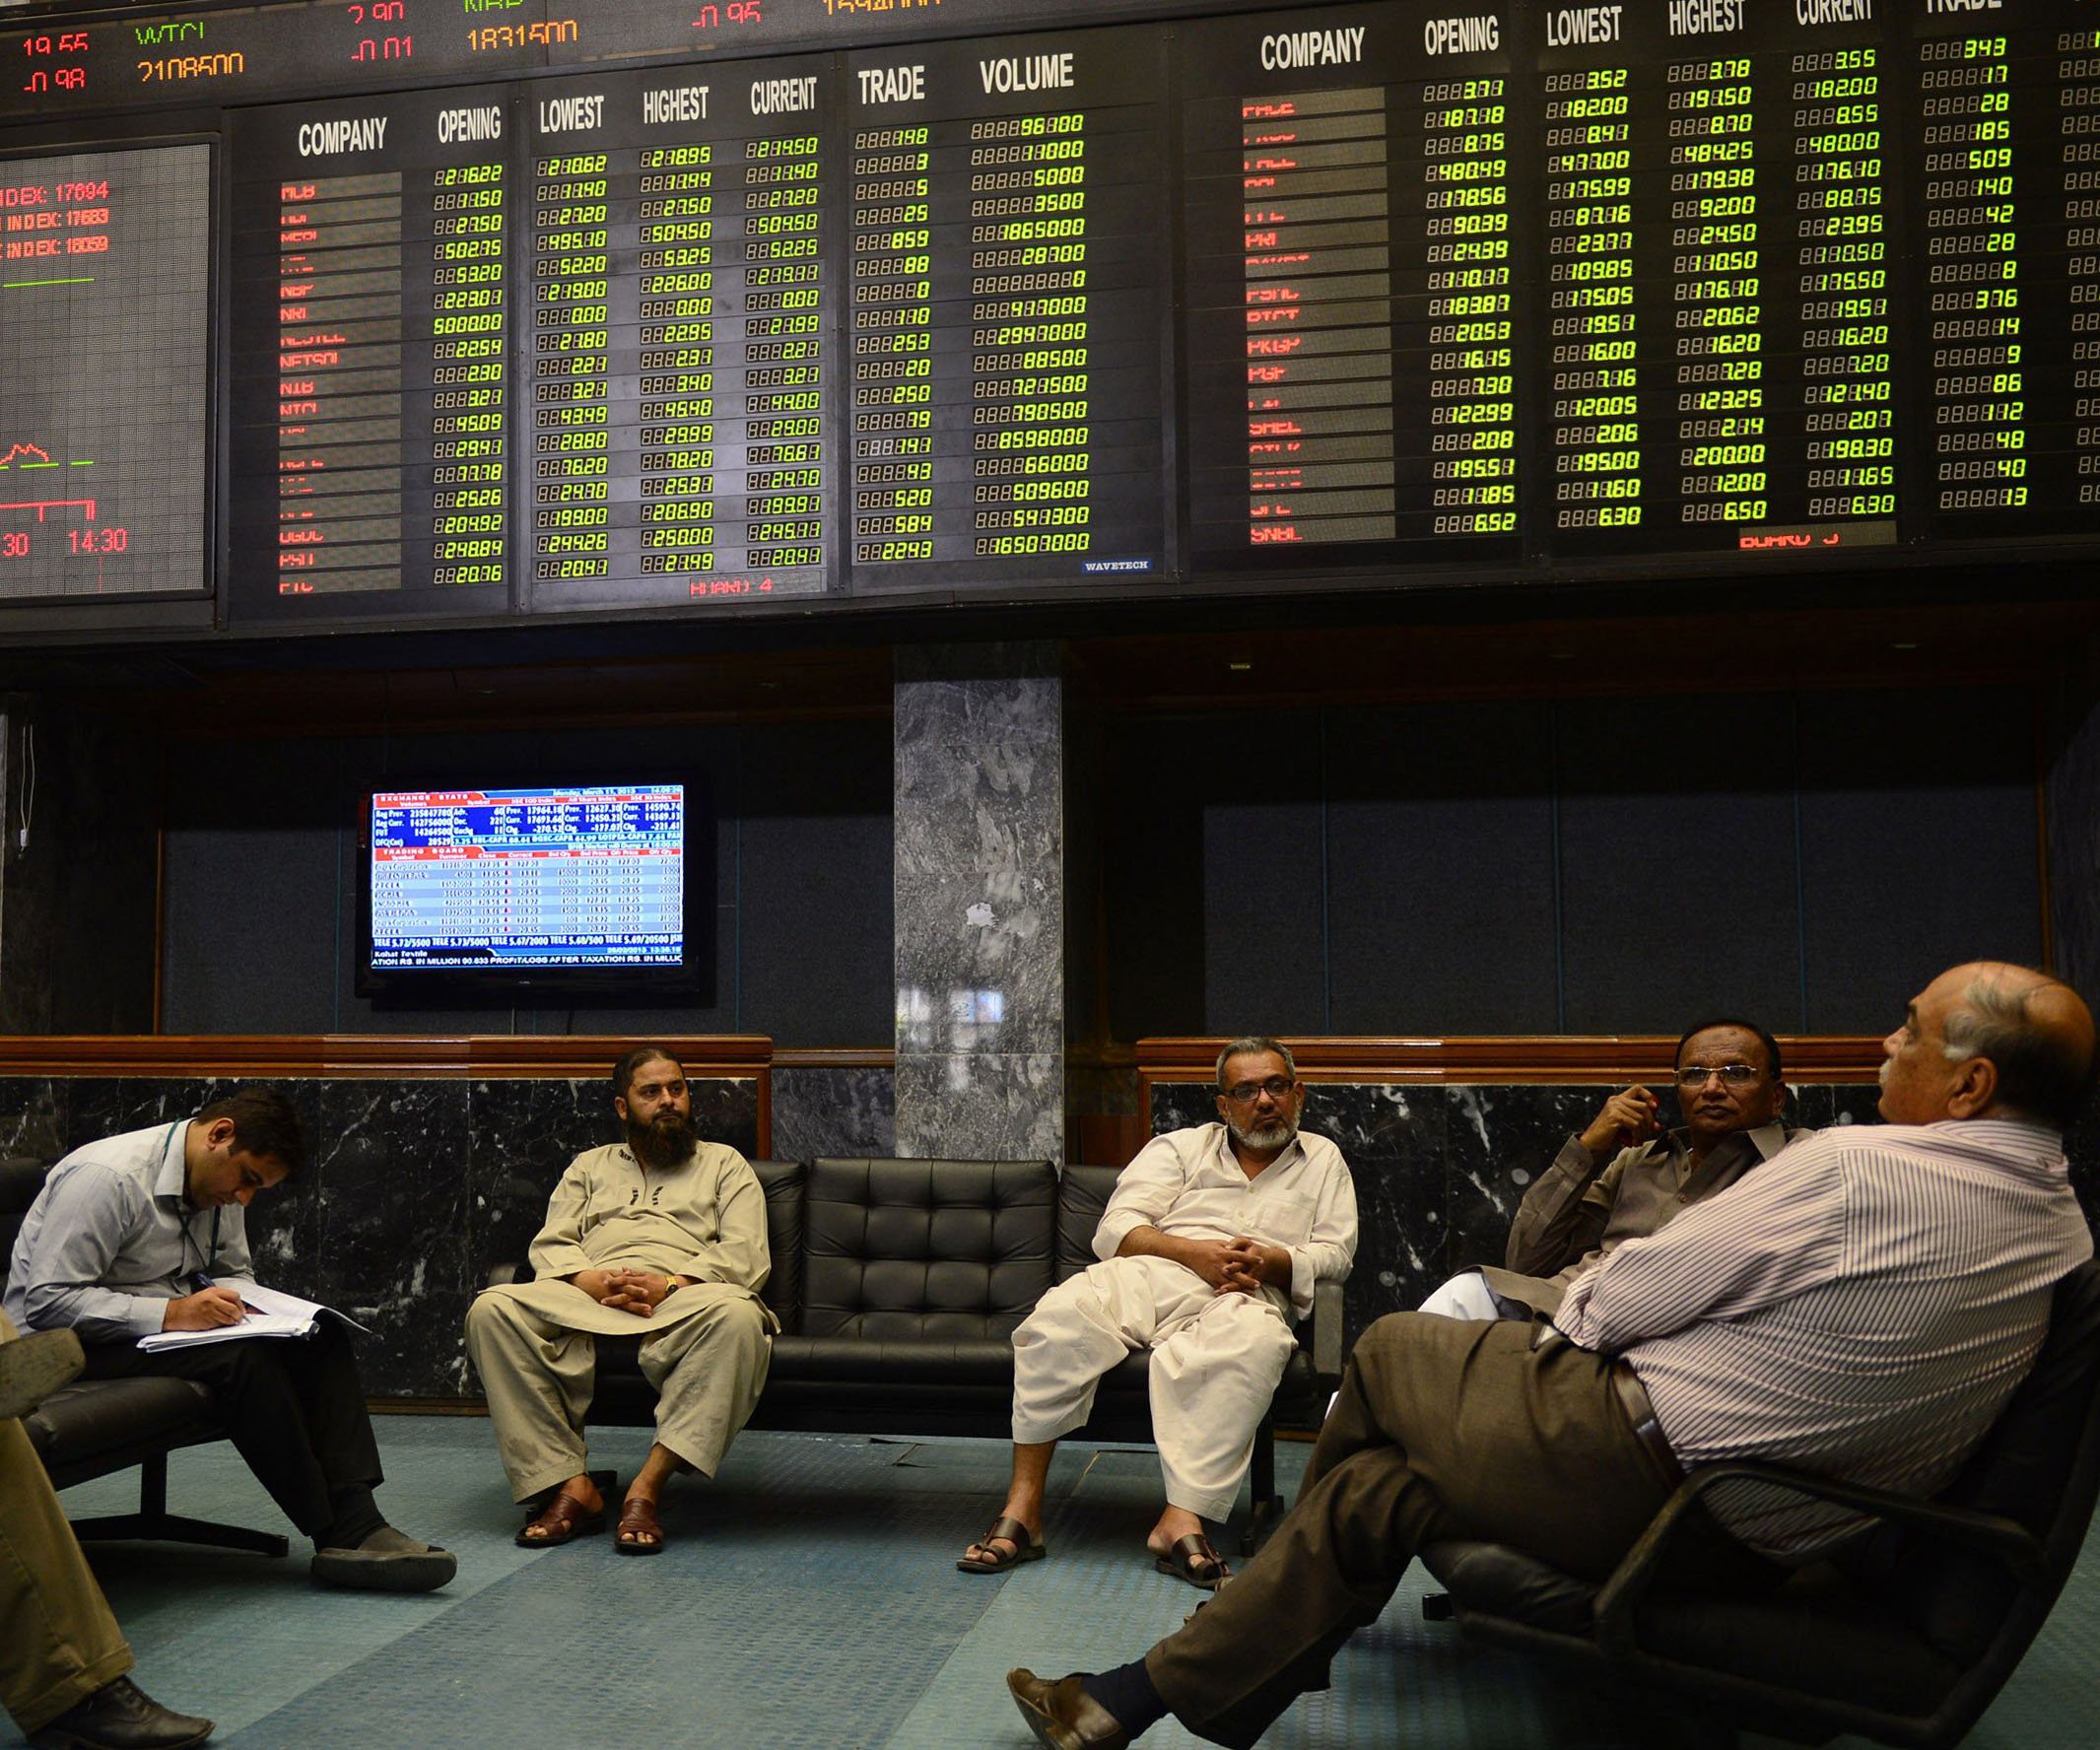 benchmark index decreases 21 52 points to settle at 42 425 10 photo afp